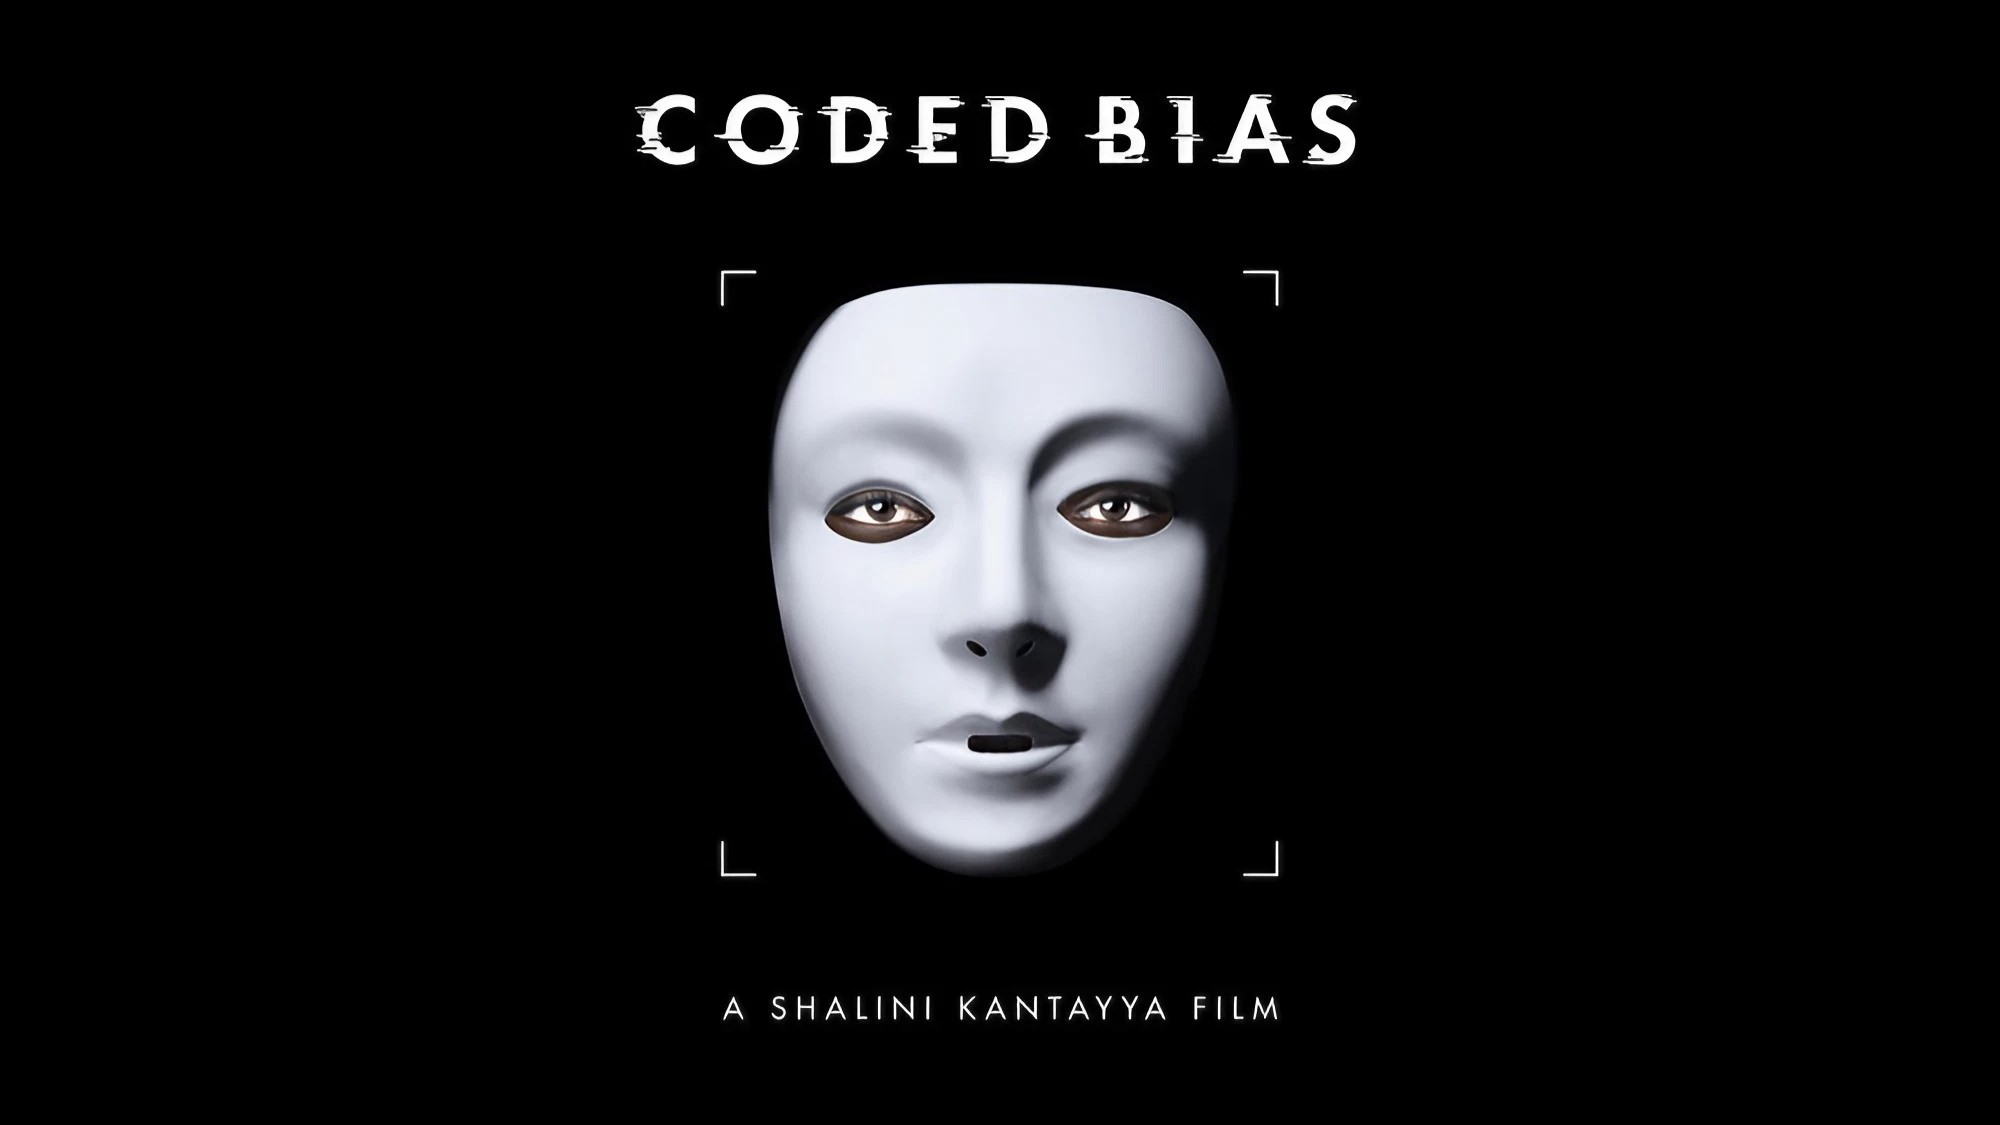 Is Coded Bias Based On A True Story?